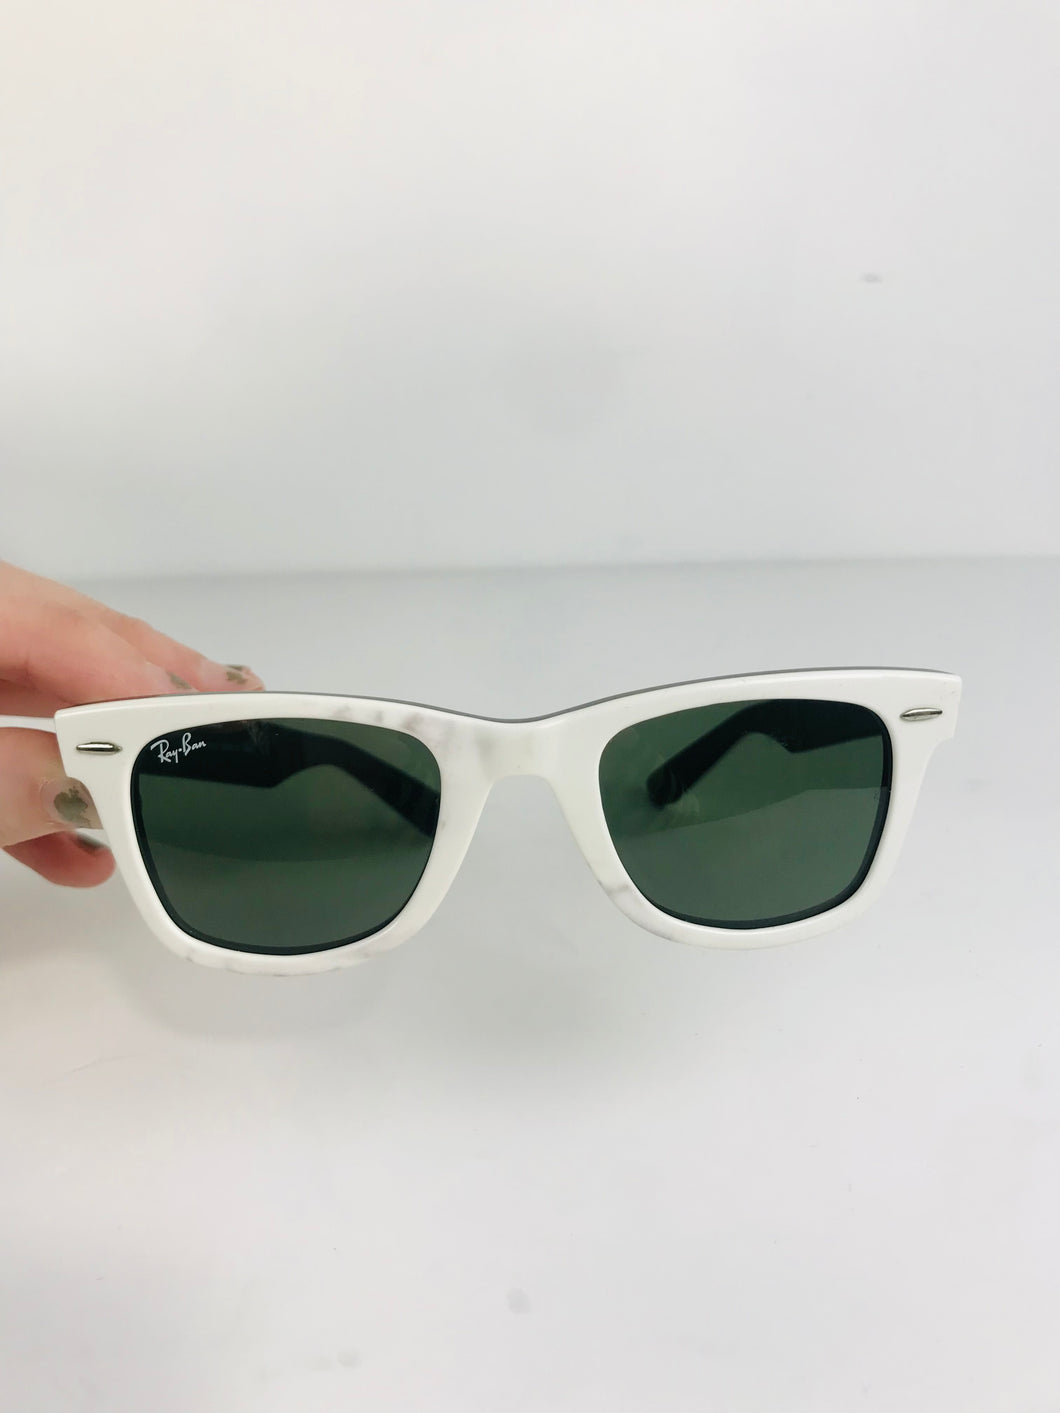 Ray Ban Women's Sunglasses Other | OS | White